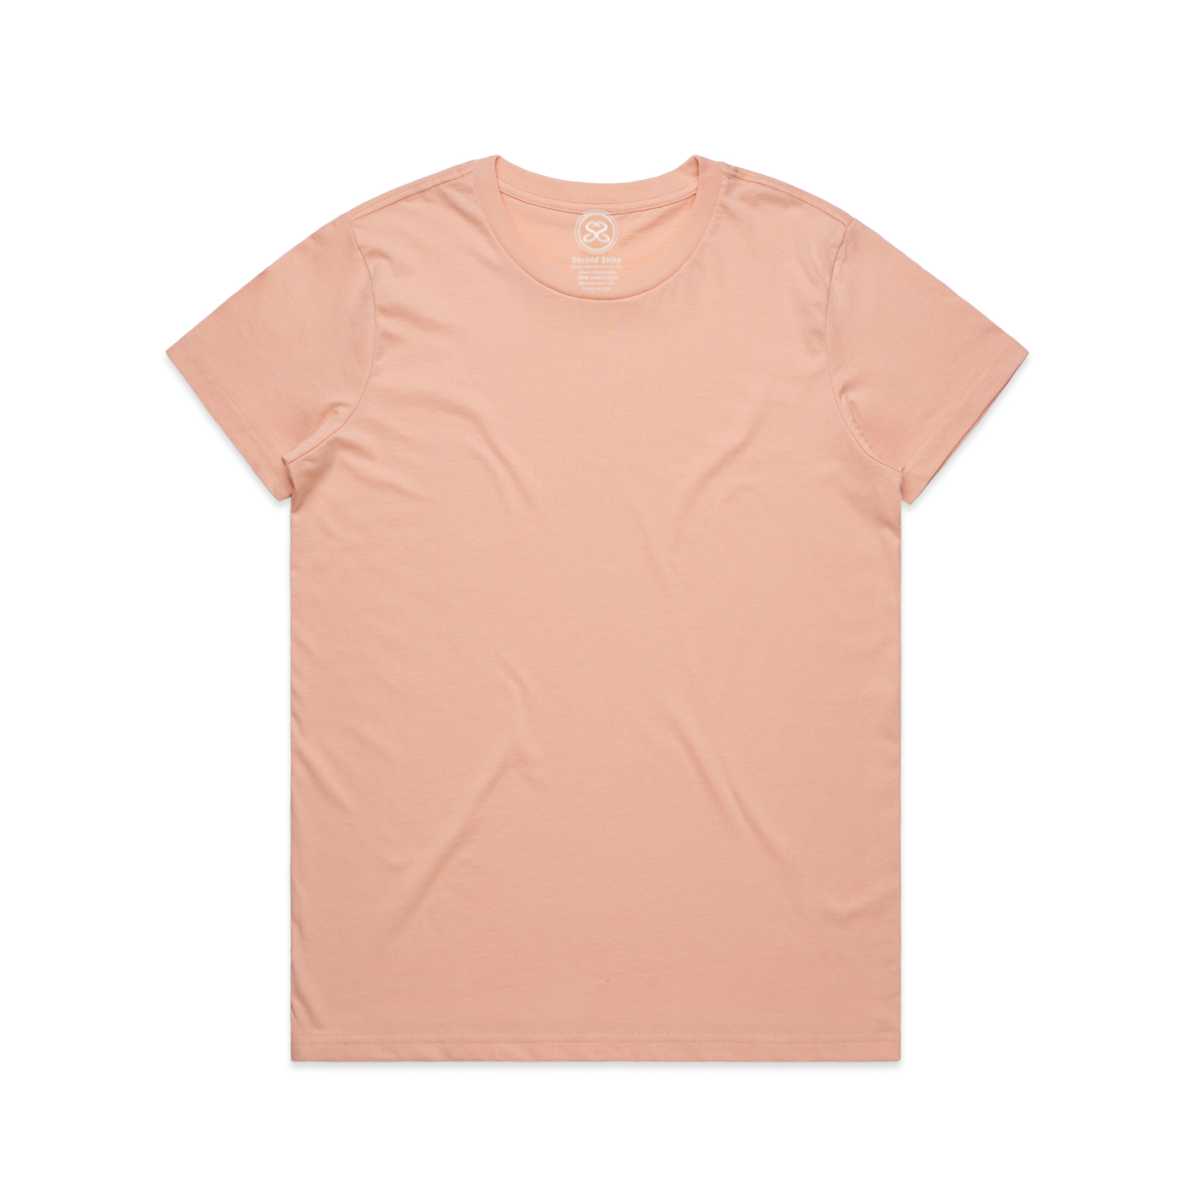 Women's T-Shirt Pale Pink By Second Skinz